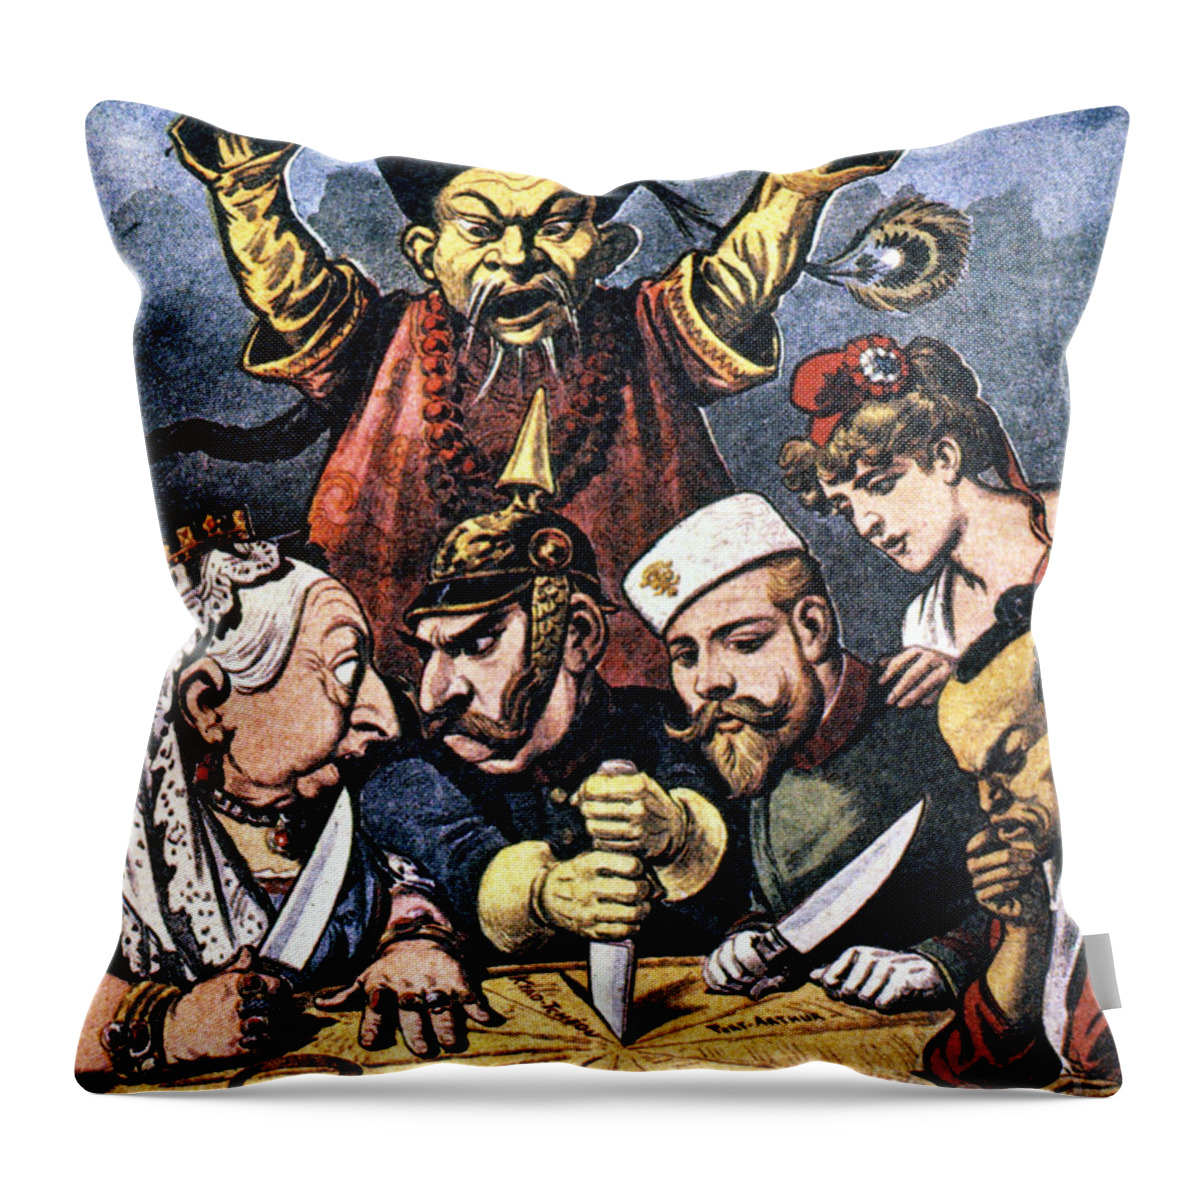 1898 Throw Pillow featuring the drawing Imperialism Cartoon by Granger